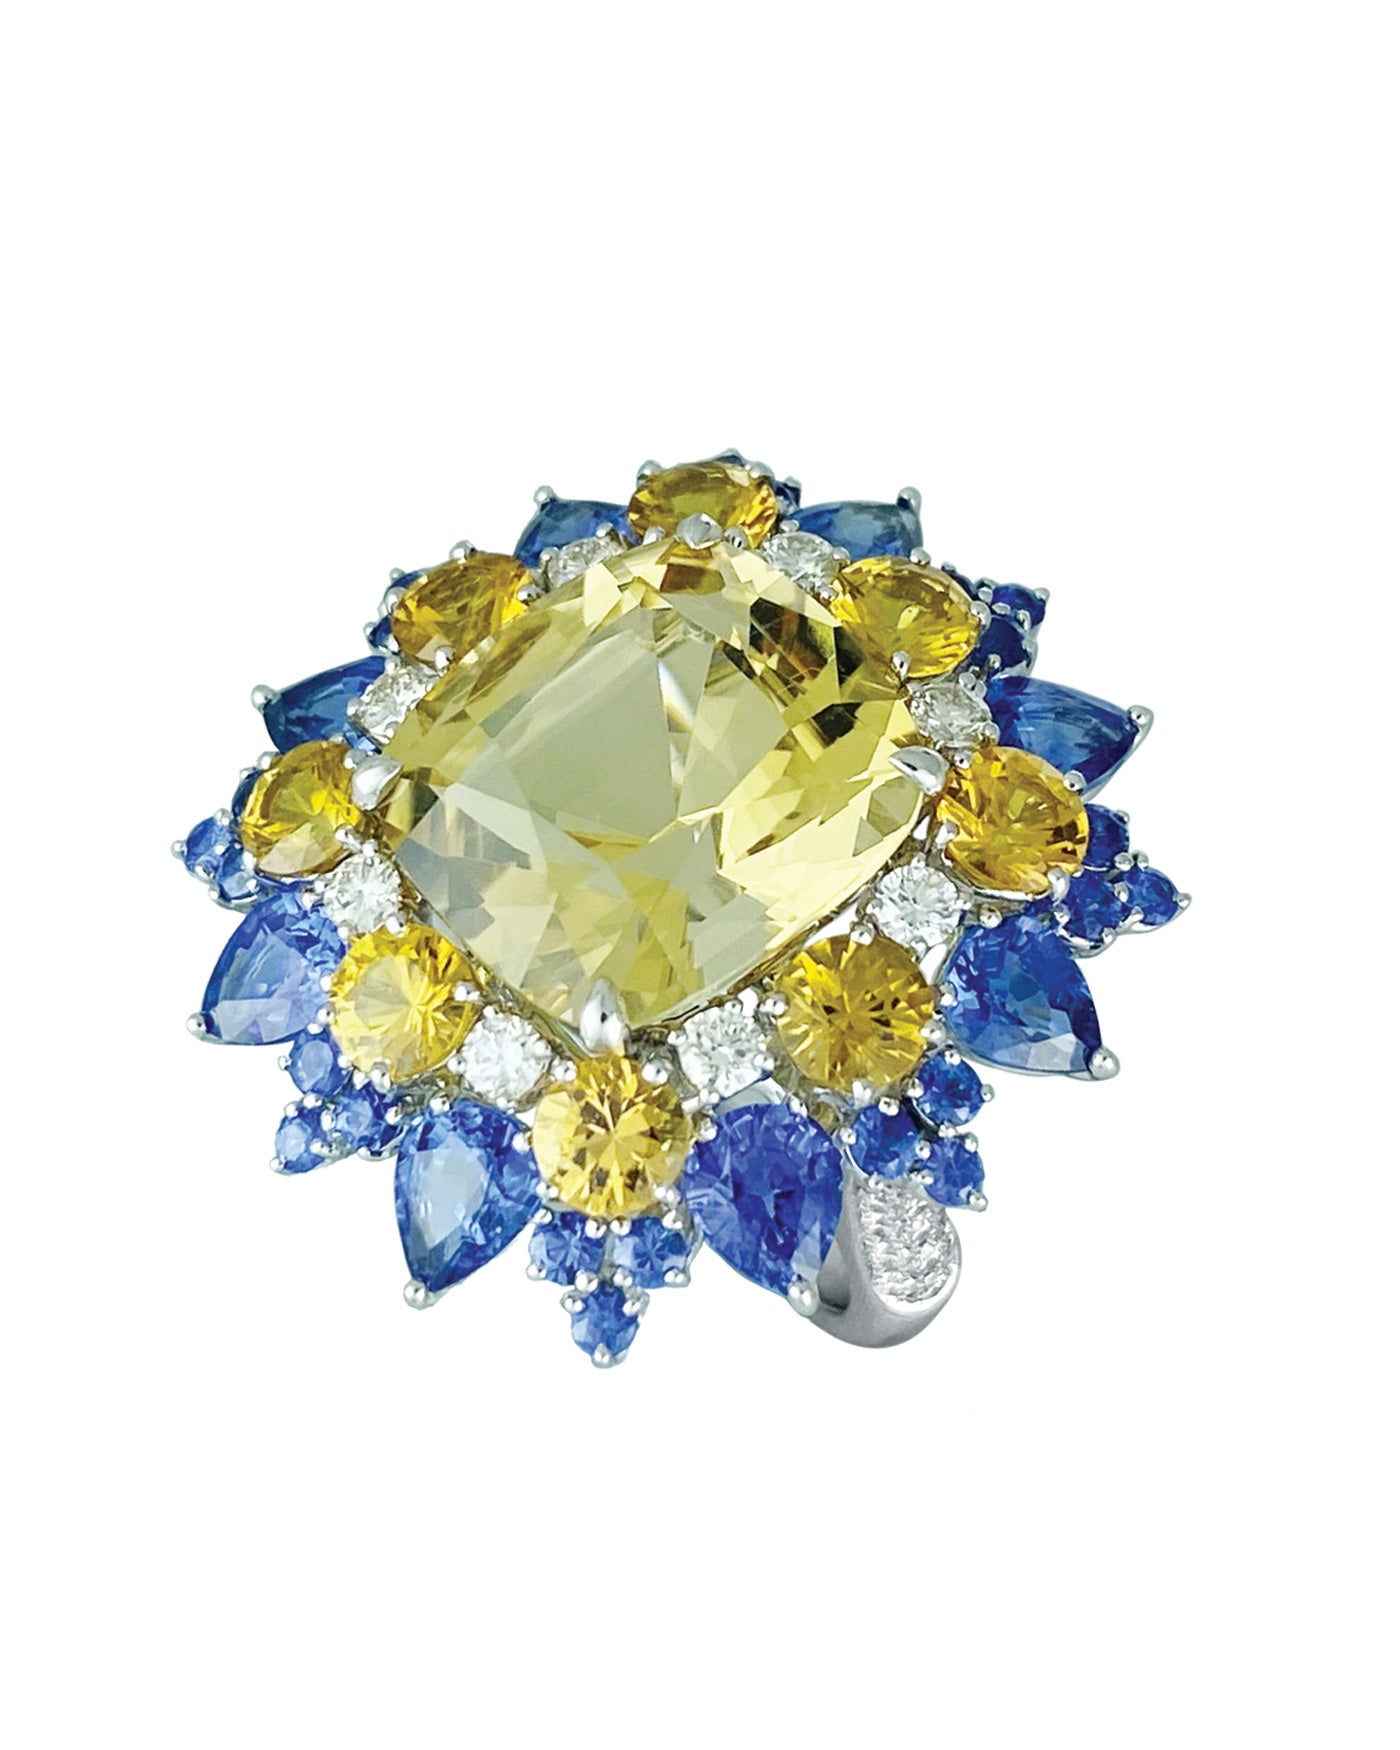 Yellow Beryl & Multi-Colour Stone Ring, crafted in 18 Karat White Gold